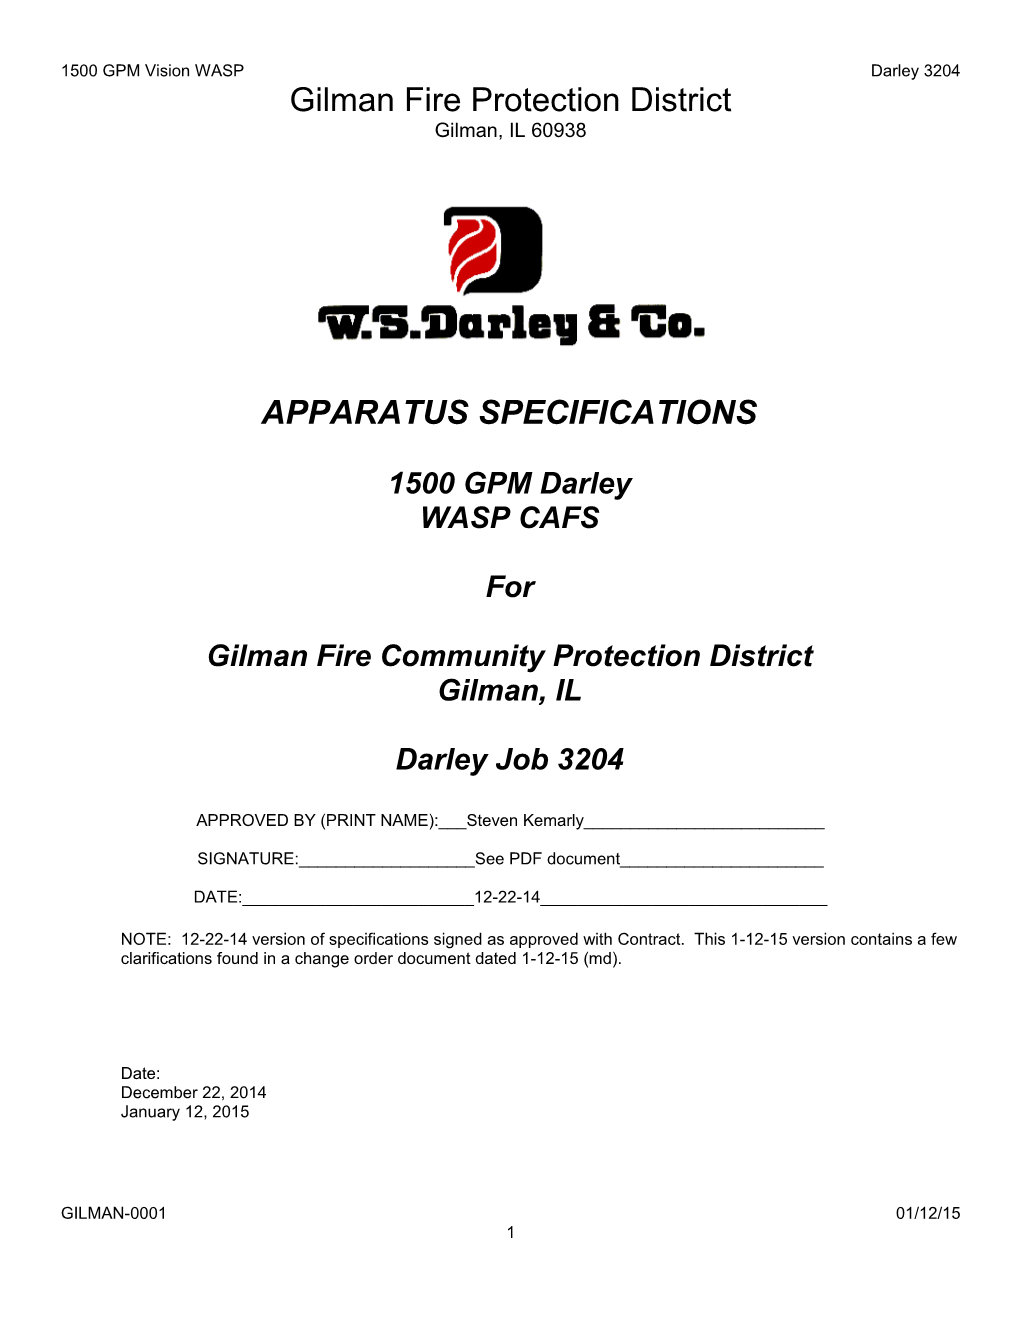 Gilman Fire Community Protection District